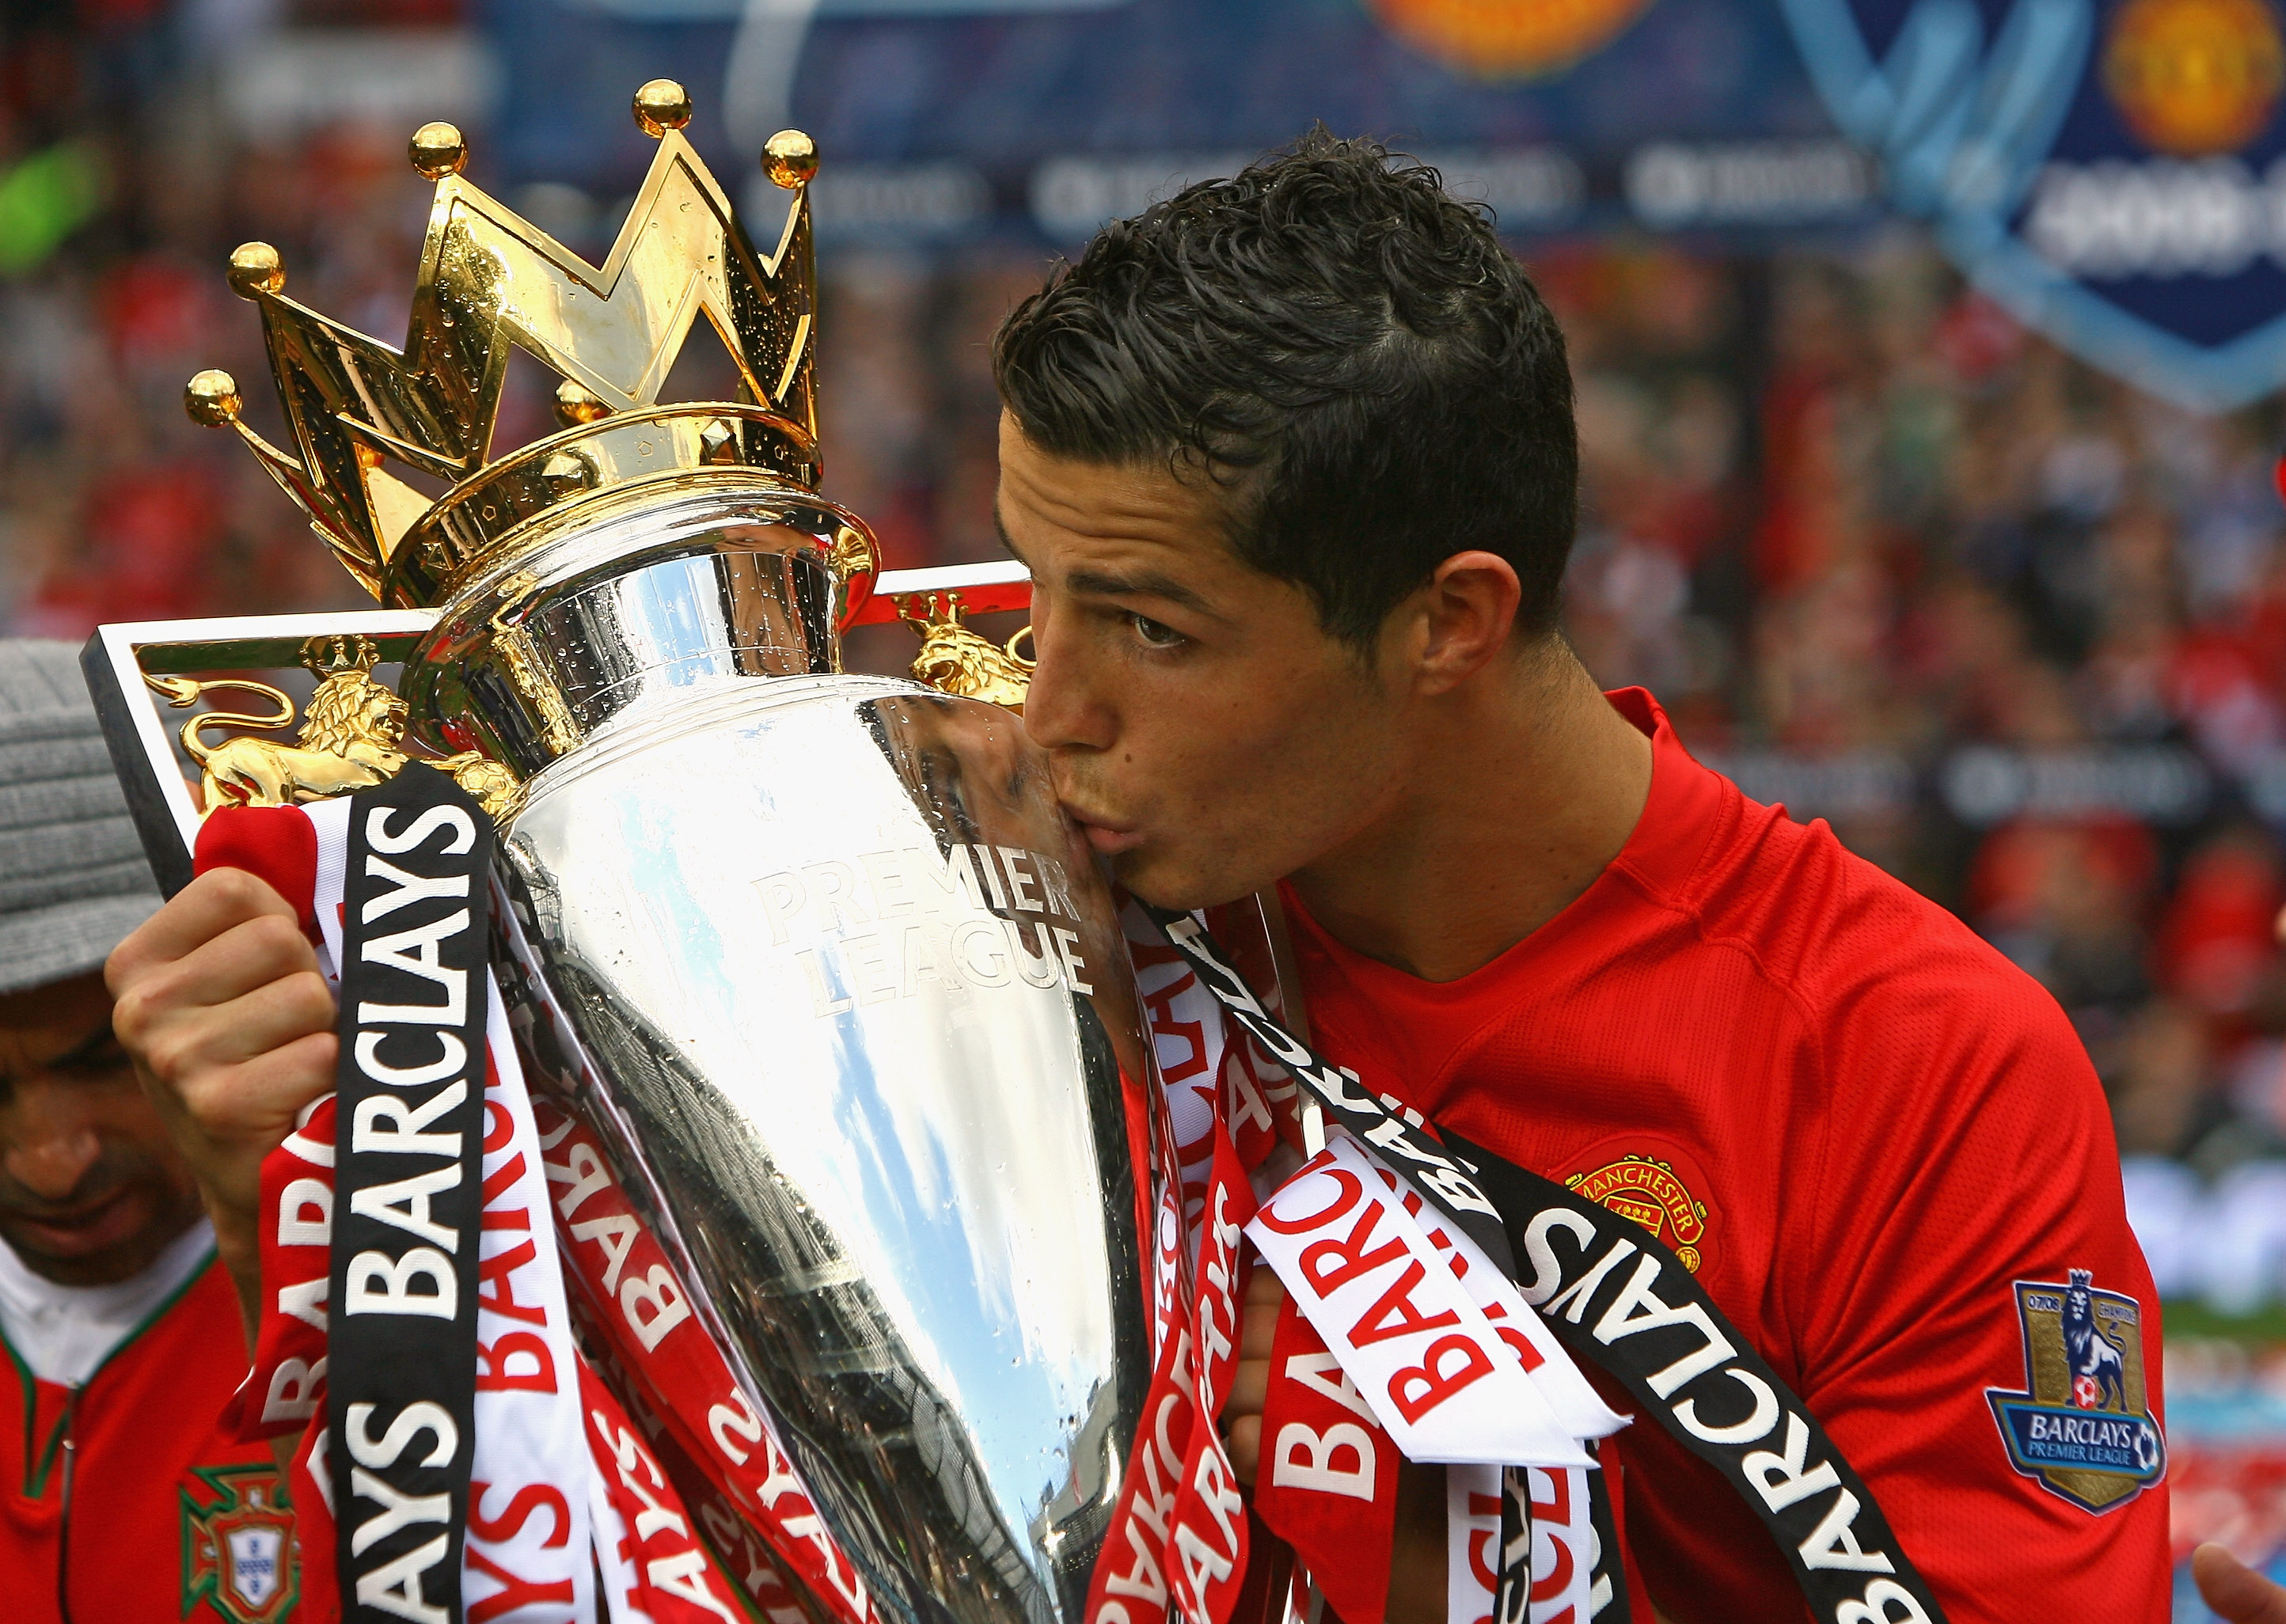 MANCHESTER, ENGLAND - MAY 16:  Cristiano Ronaldo of Manchester United lifts the Barclays Premier League trophy after the Barclays Premier League match between Manchester United and Arsenal at Old Trafford on May 16, 2009 in Manchester, England.  (Photo by